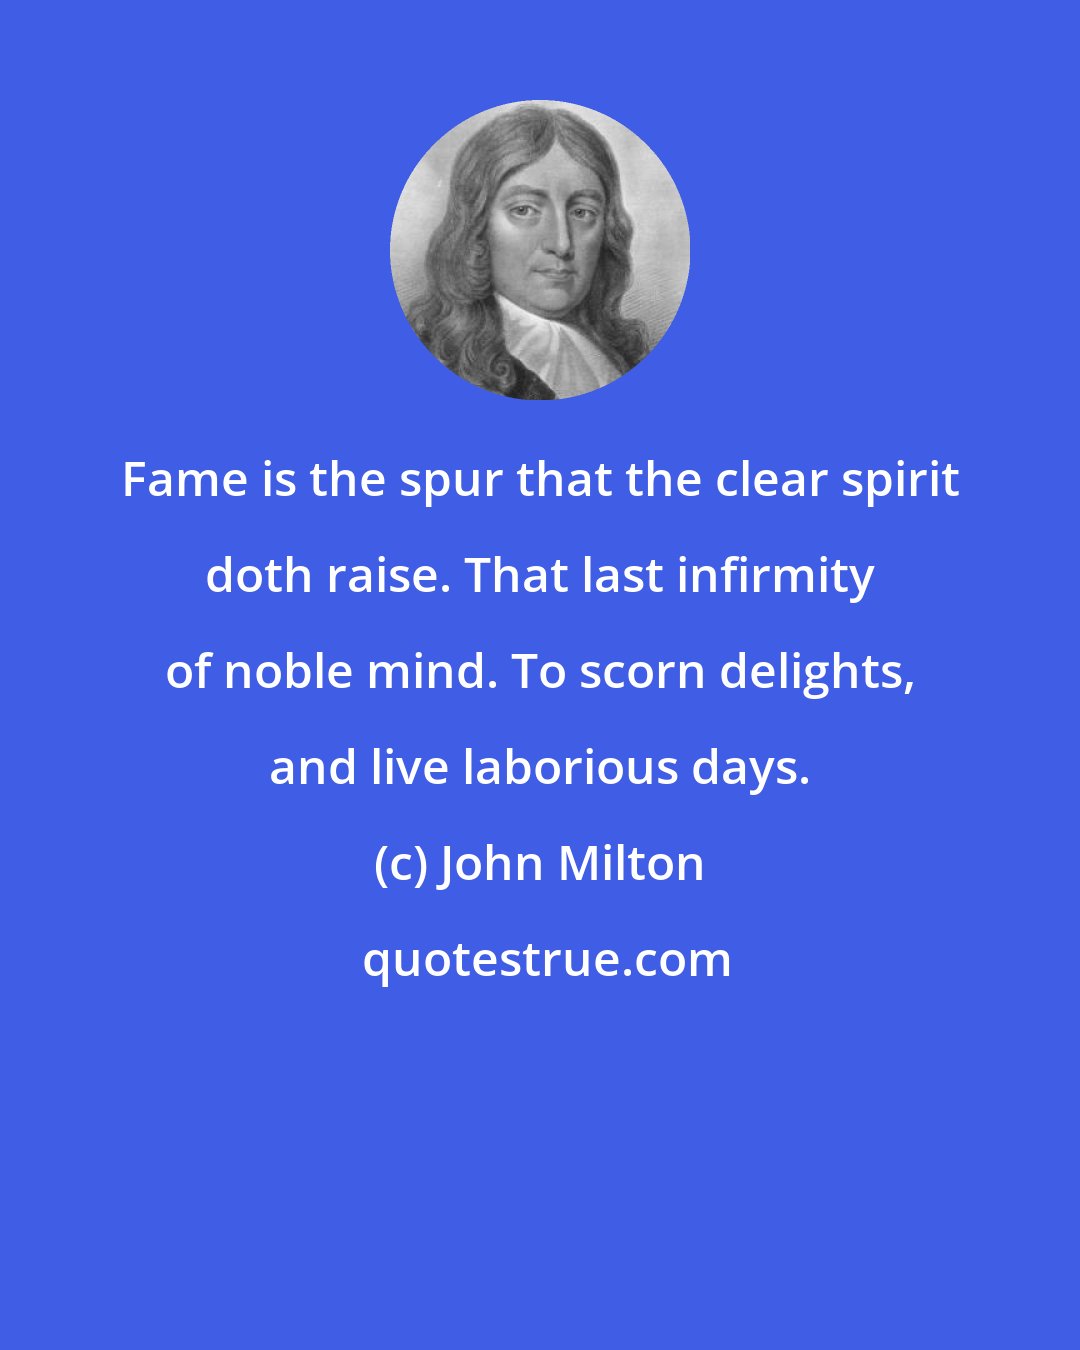 John Milton: Fame is the spur that the clear spirit doth raise. That last infirmity of noble mind. To scorn delights, and live laborious days.